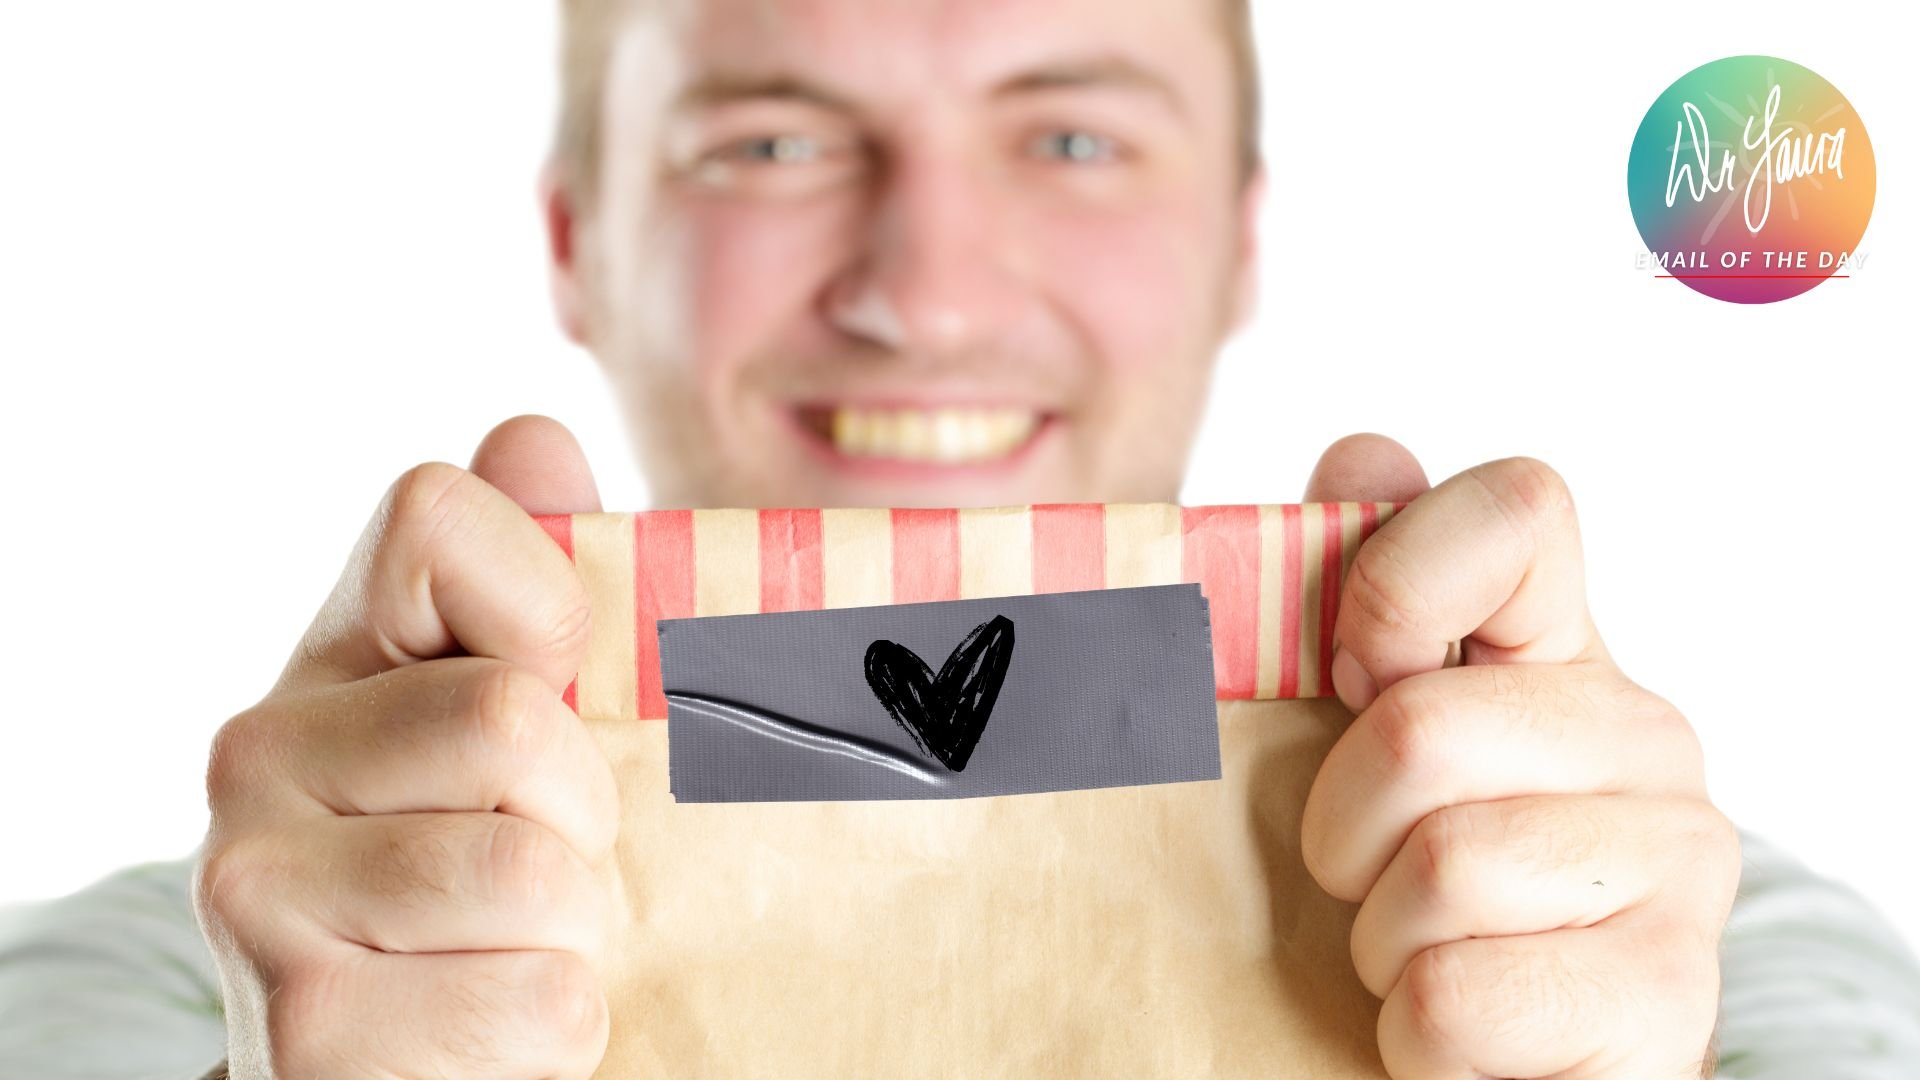 Smiling man holds up bag with grey duct tape sealing it